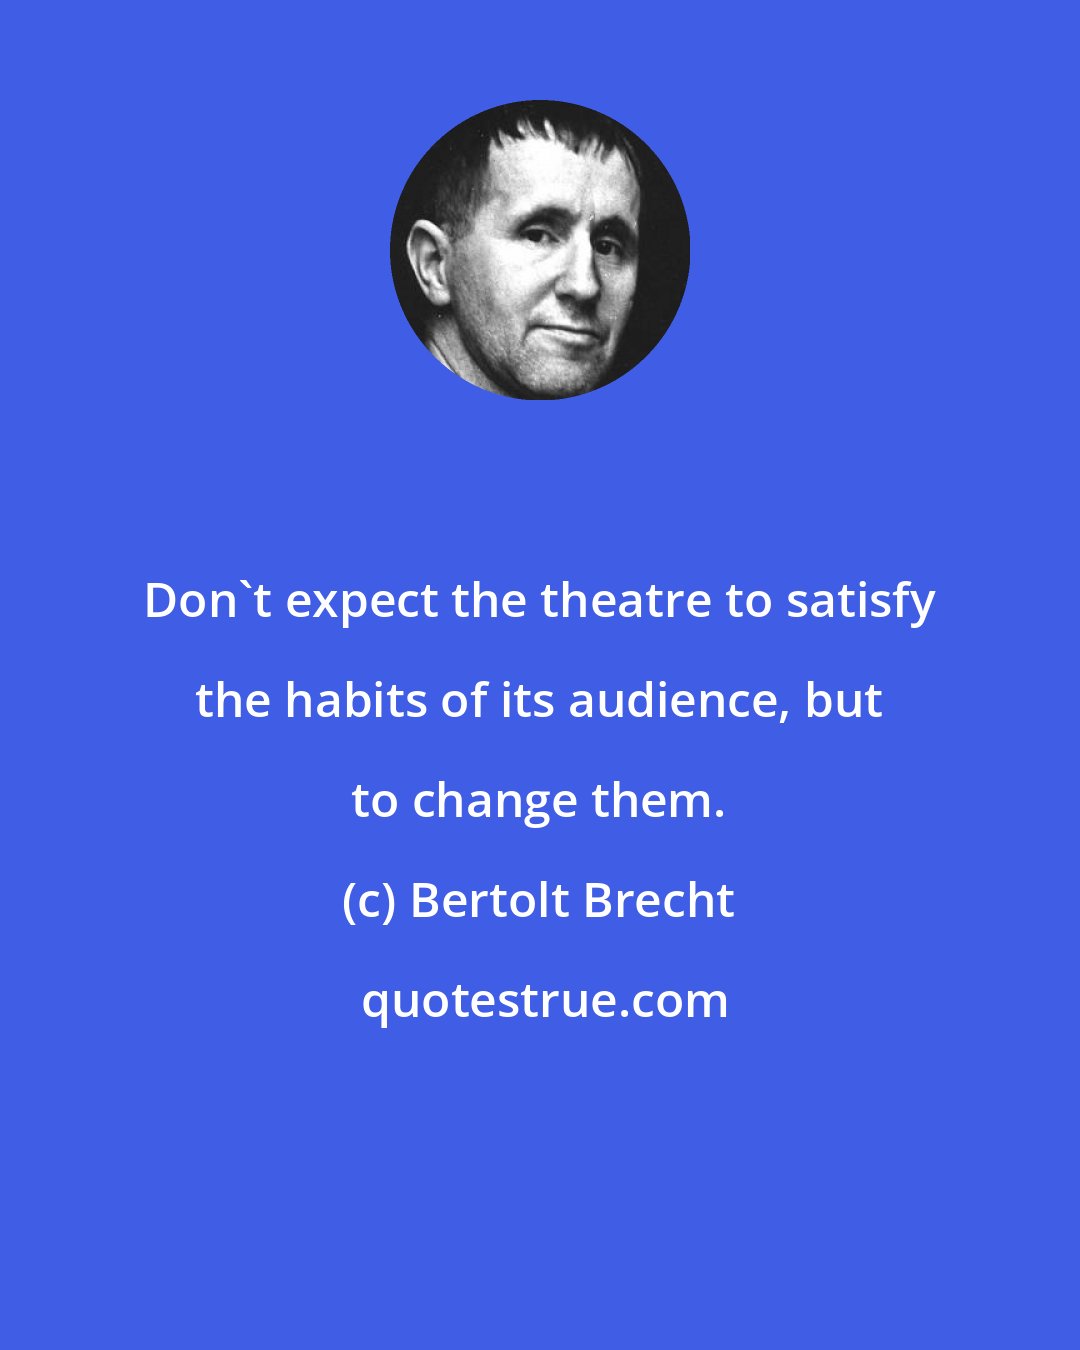 Bertolt Brecht: Don't expect the theatre to satisfy the habits of its audience, but to change them.